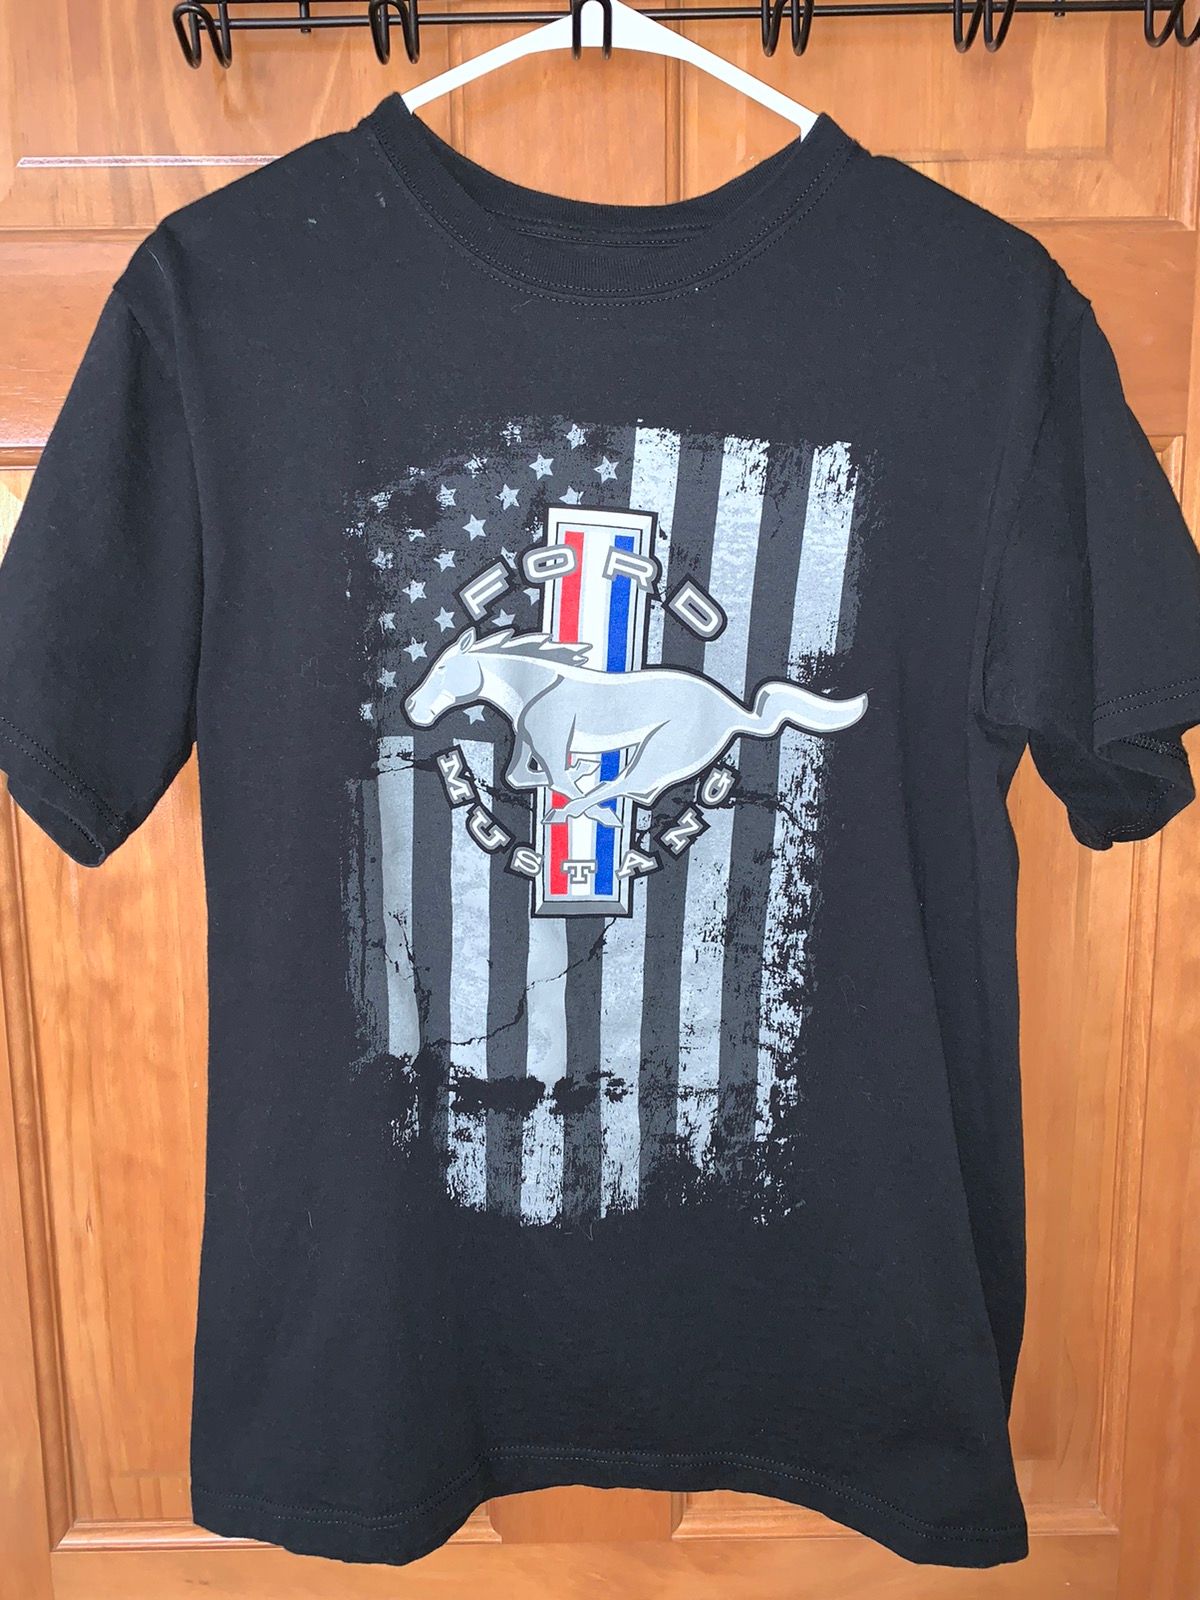 Ford VintageFord Mustang Graphic T Size US M / EU 48-50 / 2 - 1 Preview